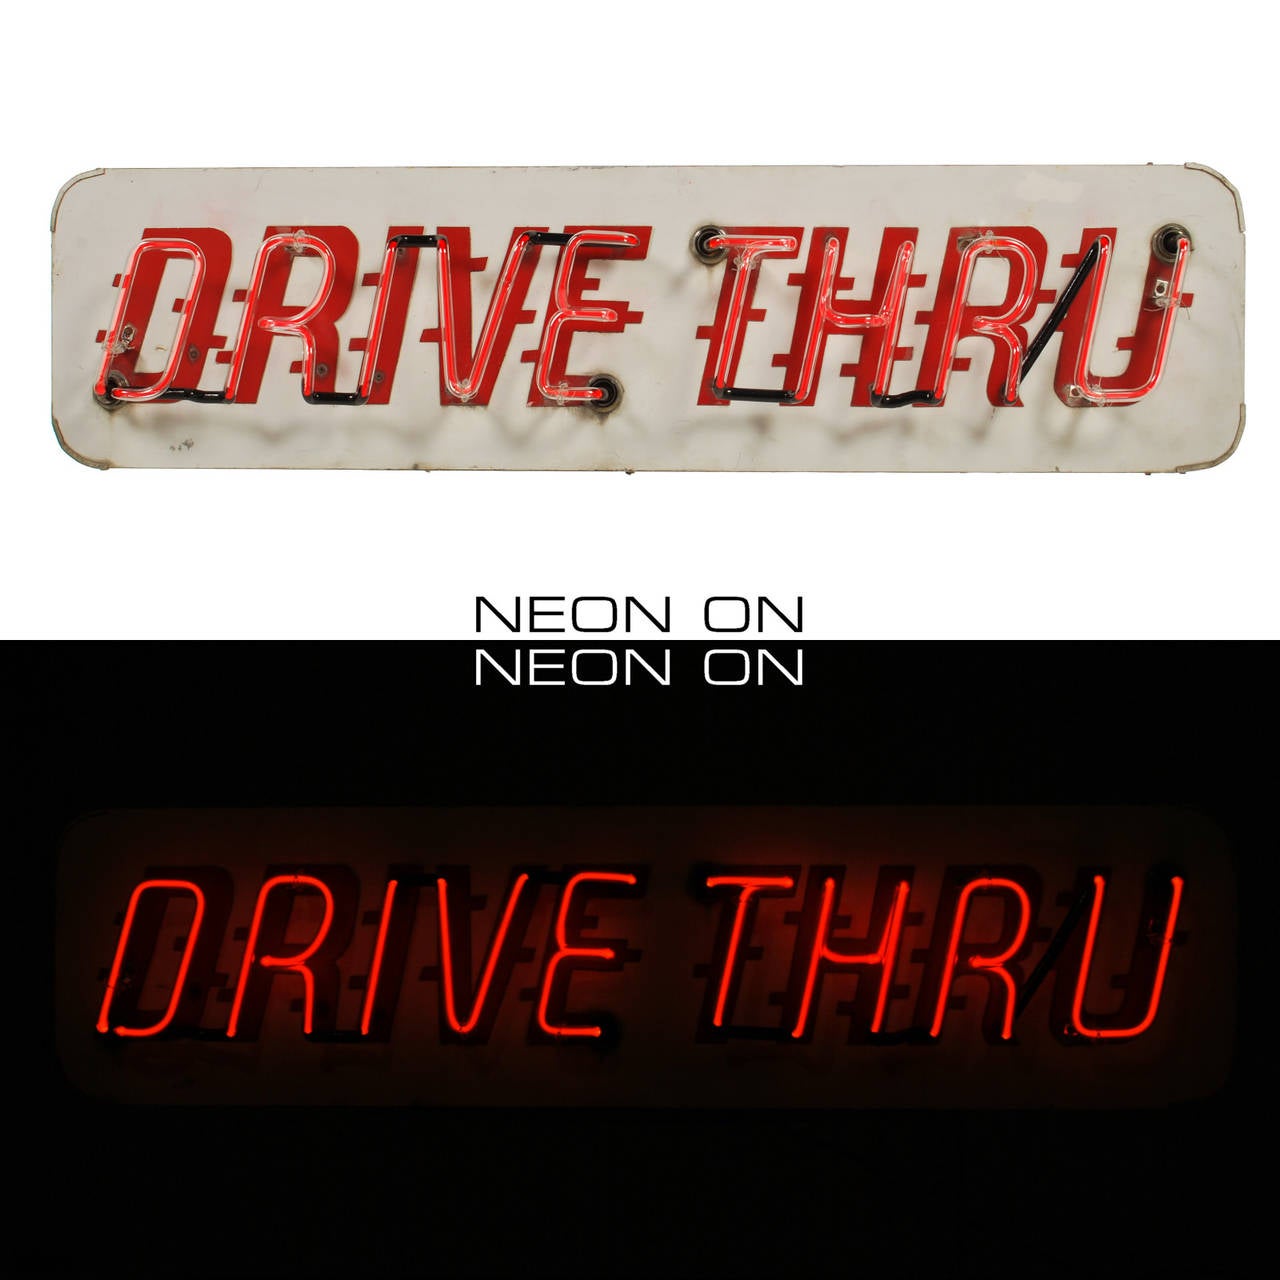 This is a great vintage “Drive Thru” sign complete with all new red neon lettering and transformer. The original red metal letters are riveted to the face of the sign and have a cool italic style font that appears to be in motion. The sign has a